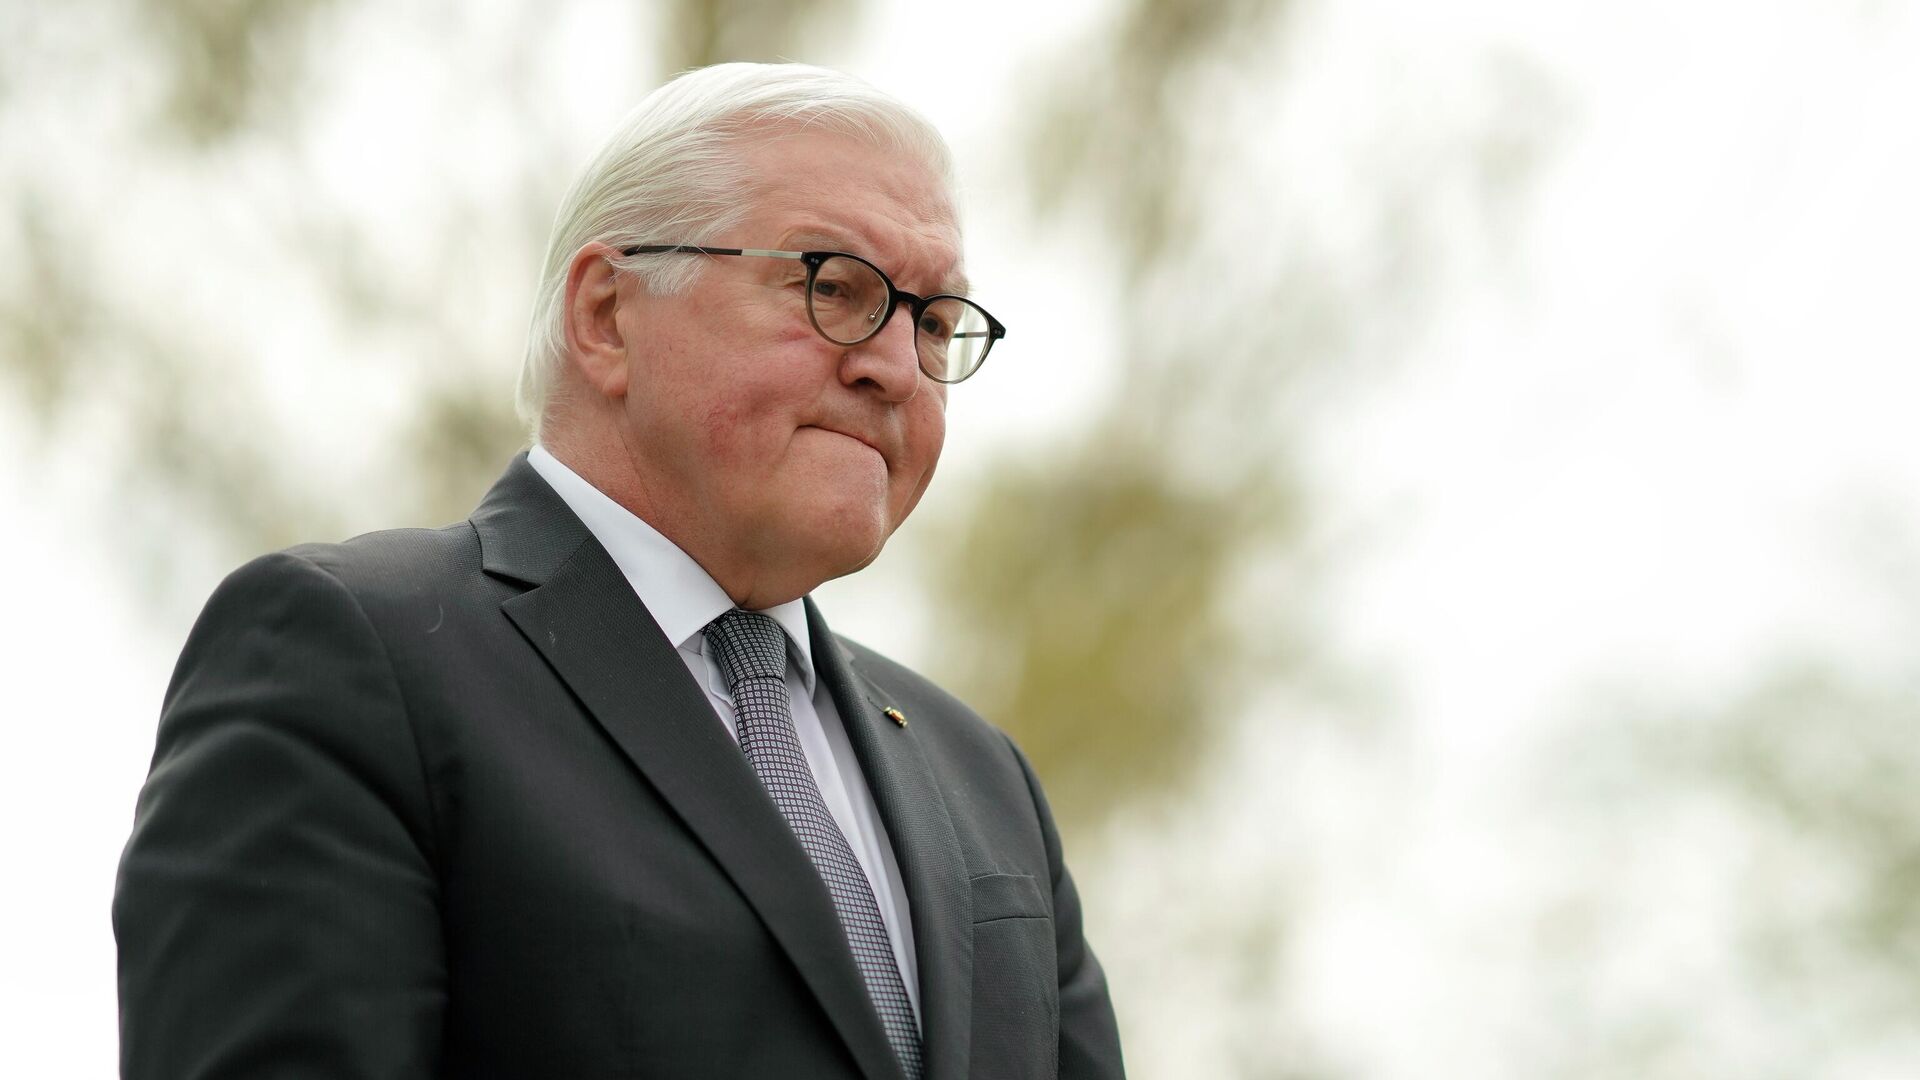 German President waited for half an hour on the plane in Qatar